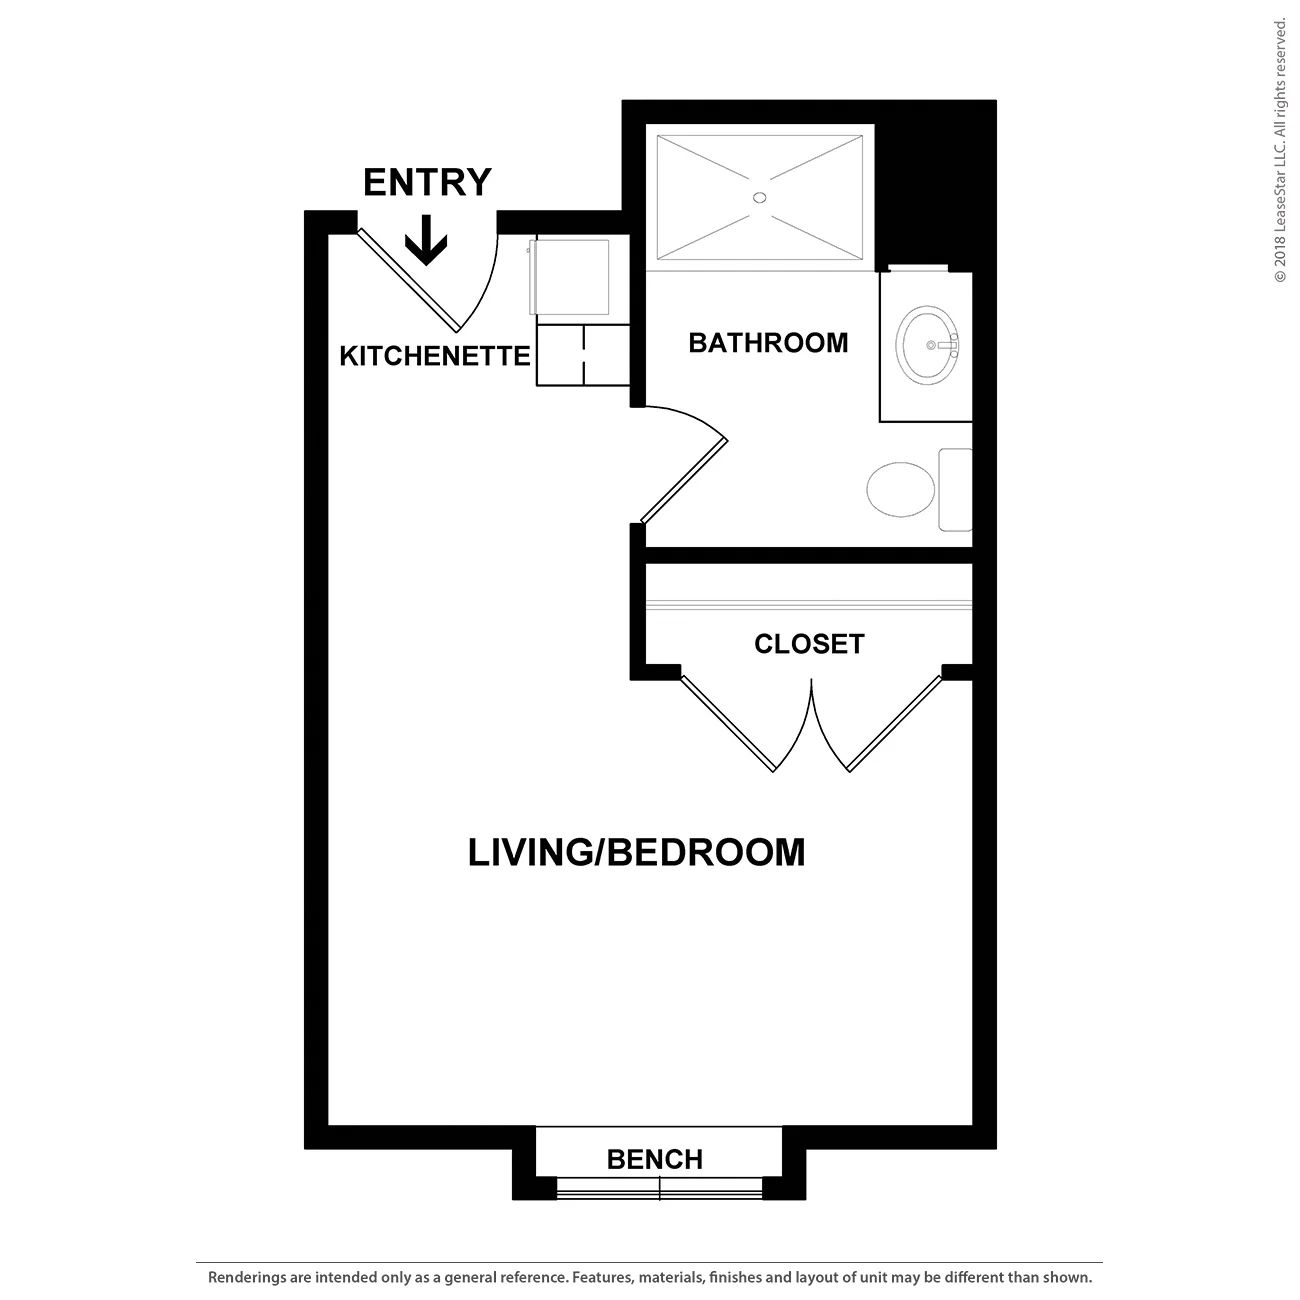 Dimensions are approximate. Floor plans may vary.